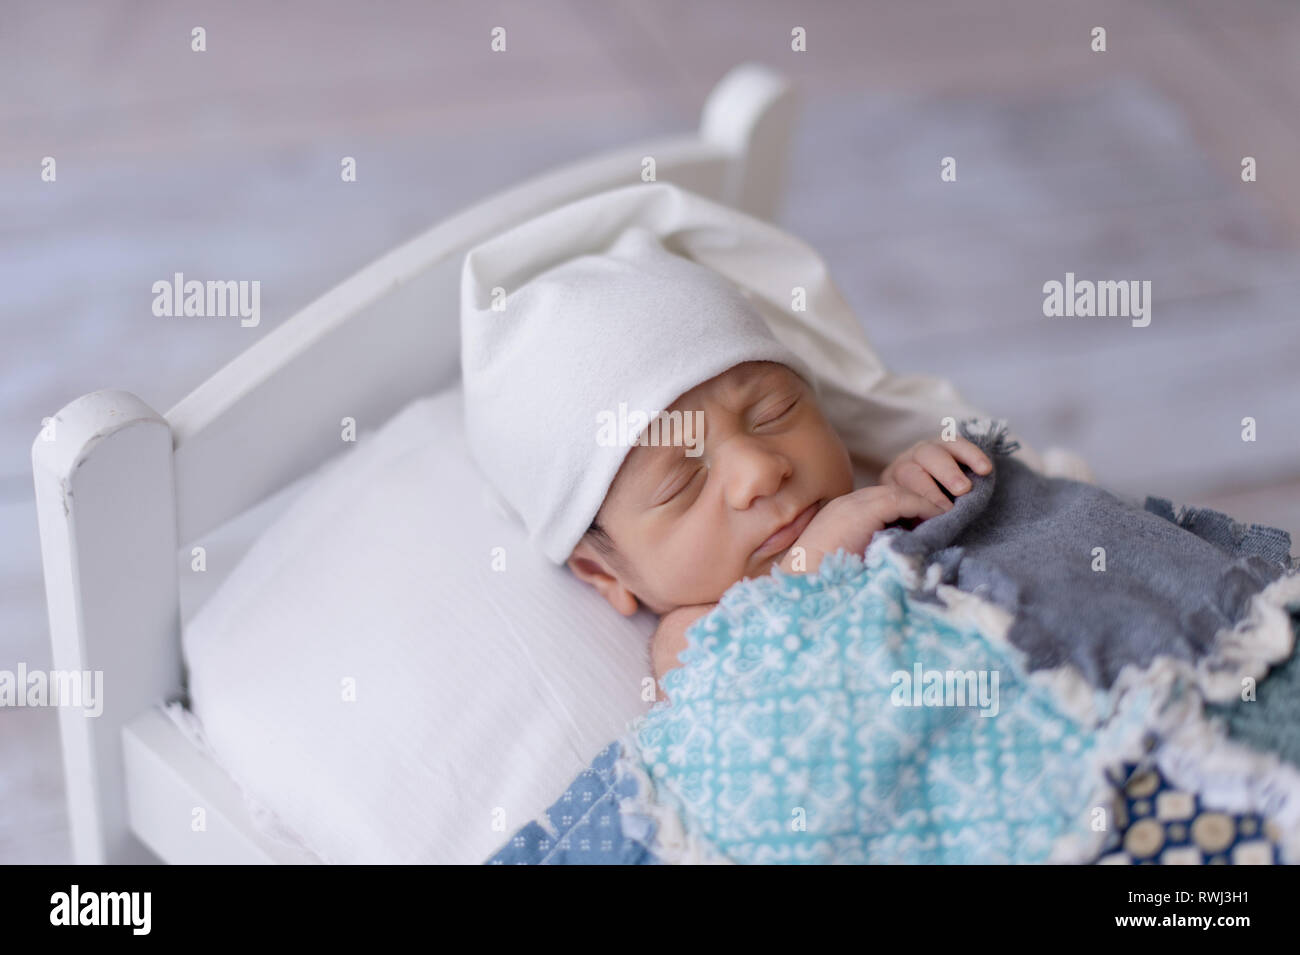 One week old newborn baby boy wearing a white sleeping cap. He is sleeping on a tiny, white bed and covered with a blue, patchwork quilt. Stock Photo